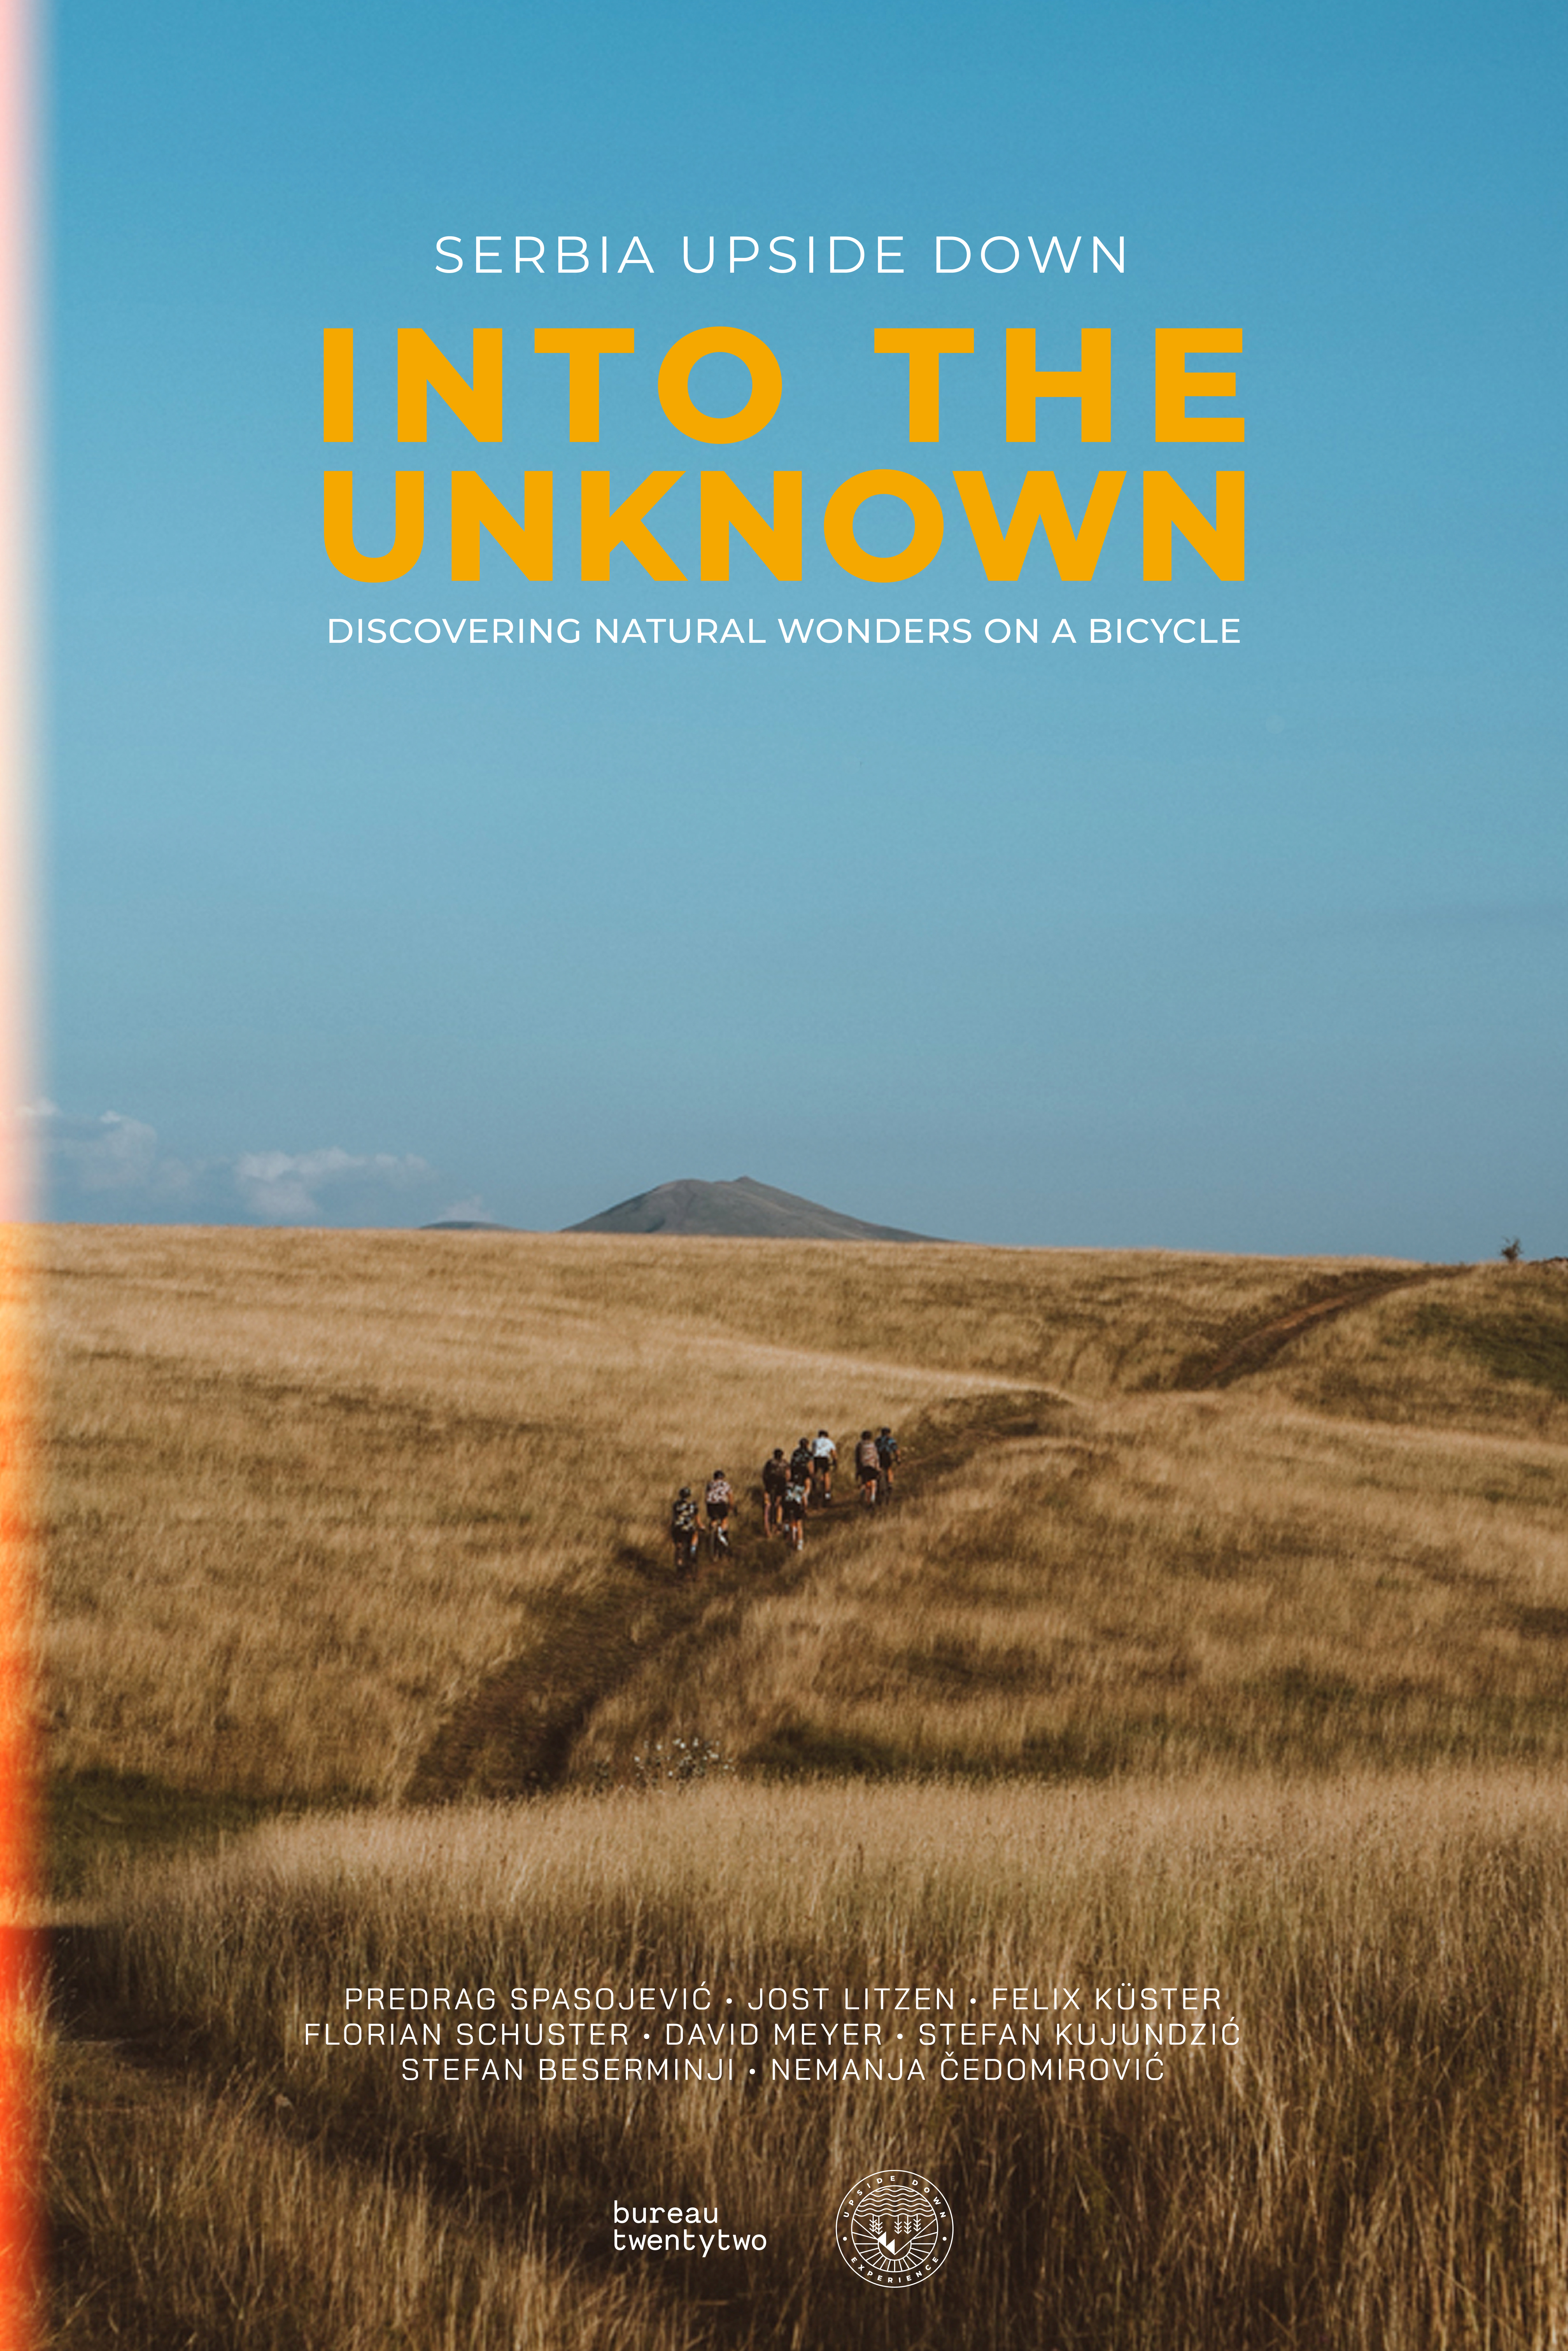 Serbia Upside Down: Into the Unknown